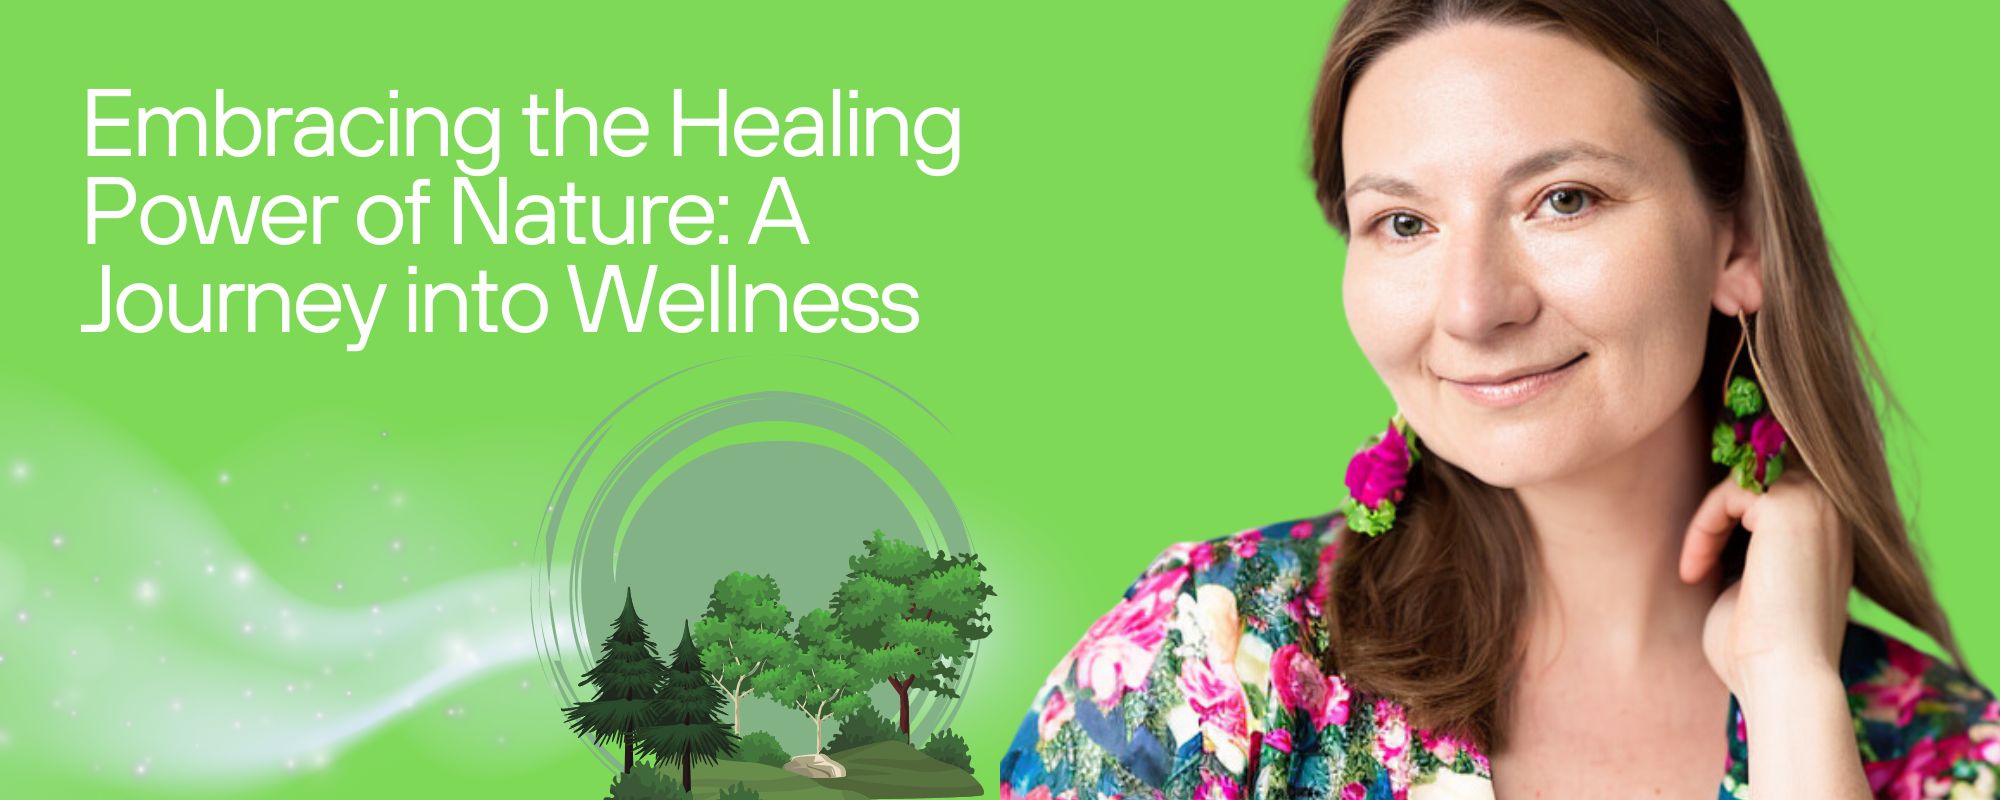 Embracing the Healing Power of Nature A Journey into Wellness - marta loveguard